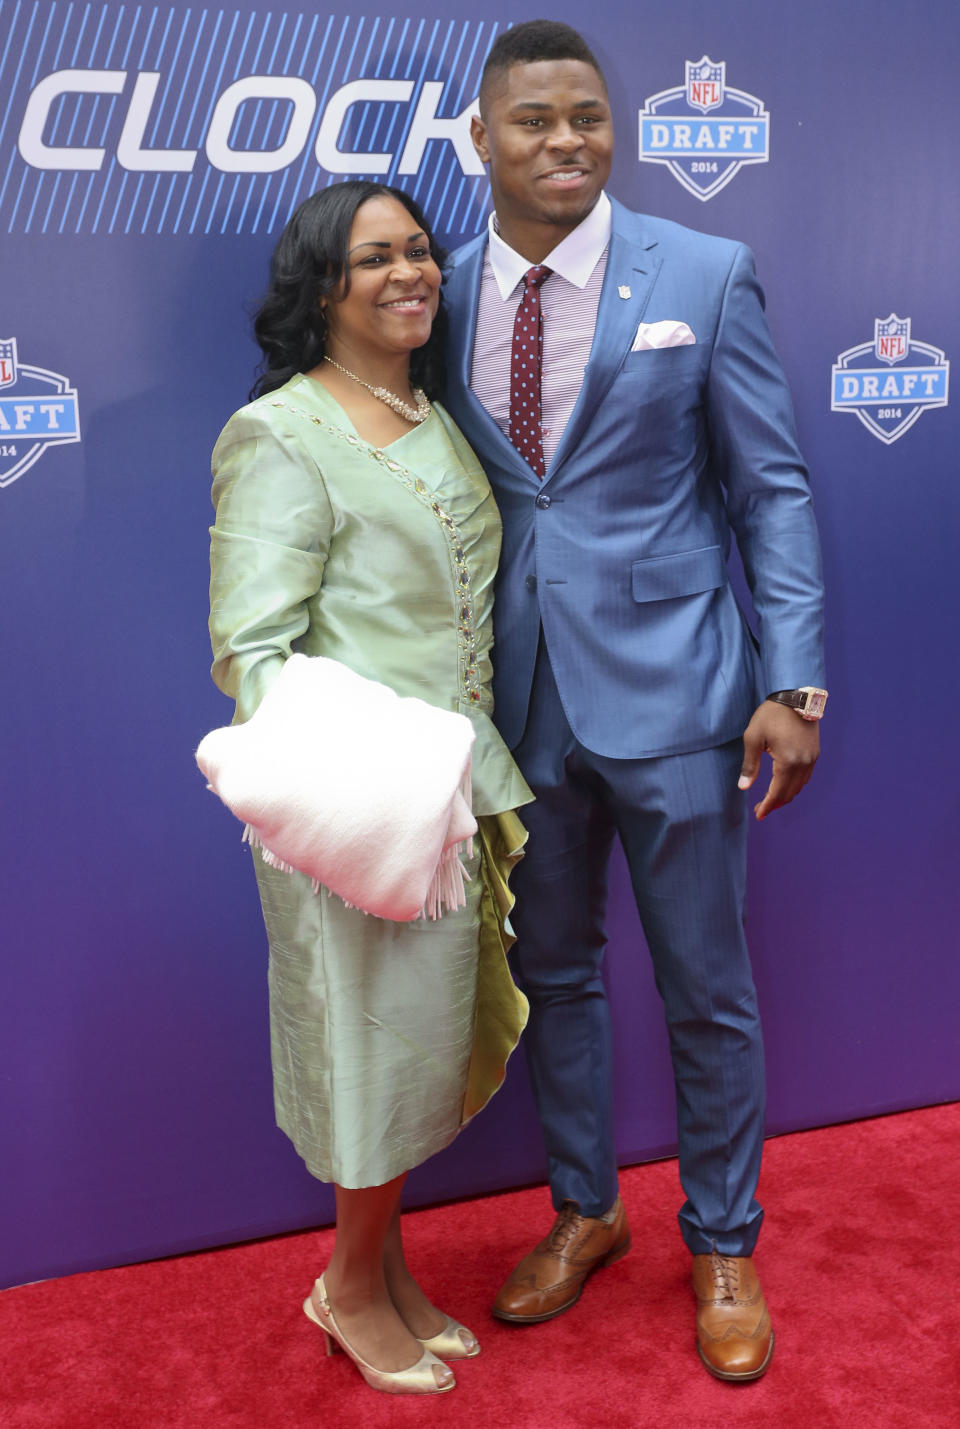 Buffalo linebacker Khalil Mack, right, poses for photos with his mother, Yolanda Mack, on the red carpet upon arriving for the first round of the 2014 NFL Draft, Thursday, May 8, 2014, in New York. (AP Photo/Craig Ruttle)